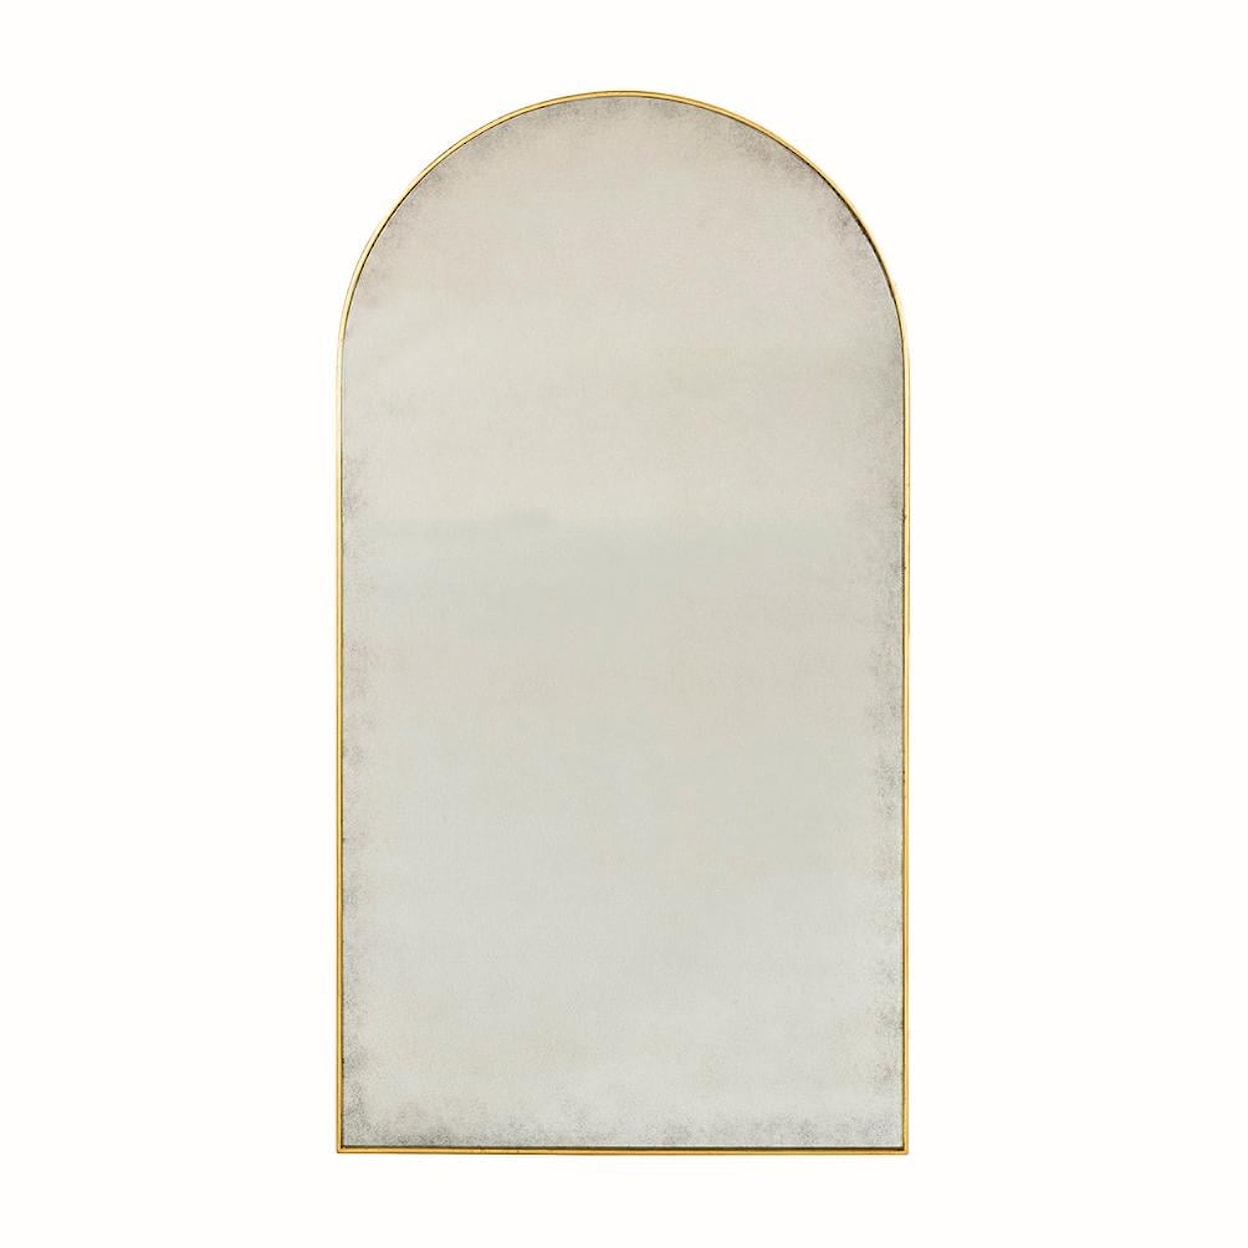 Oliver Home Furnishings Mirrors Arched Antique Mirror